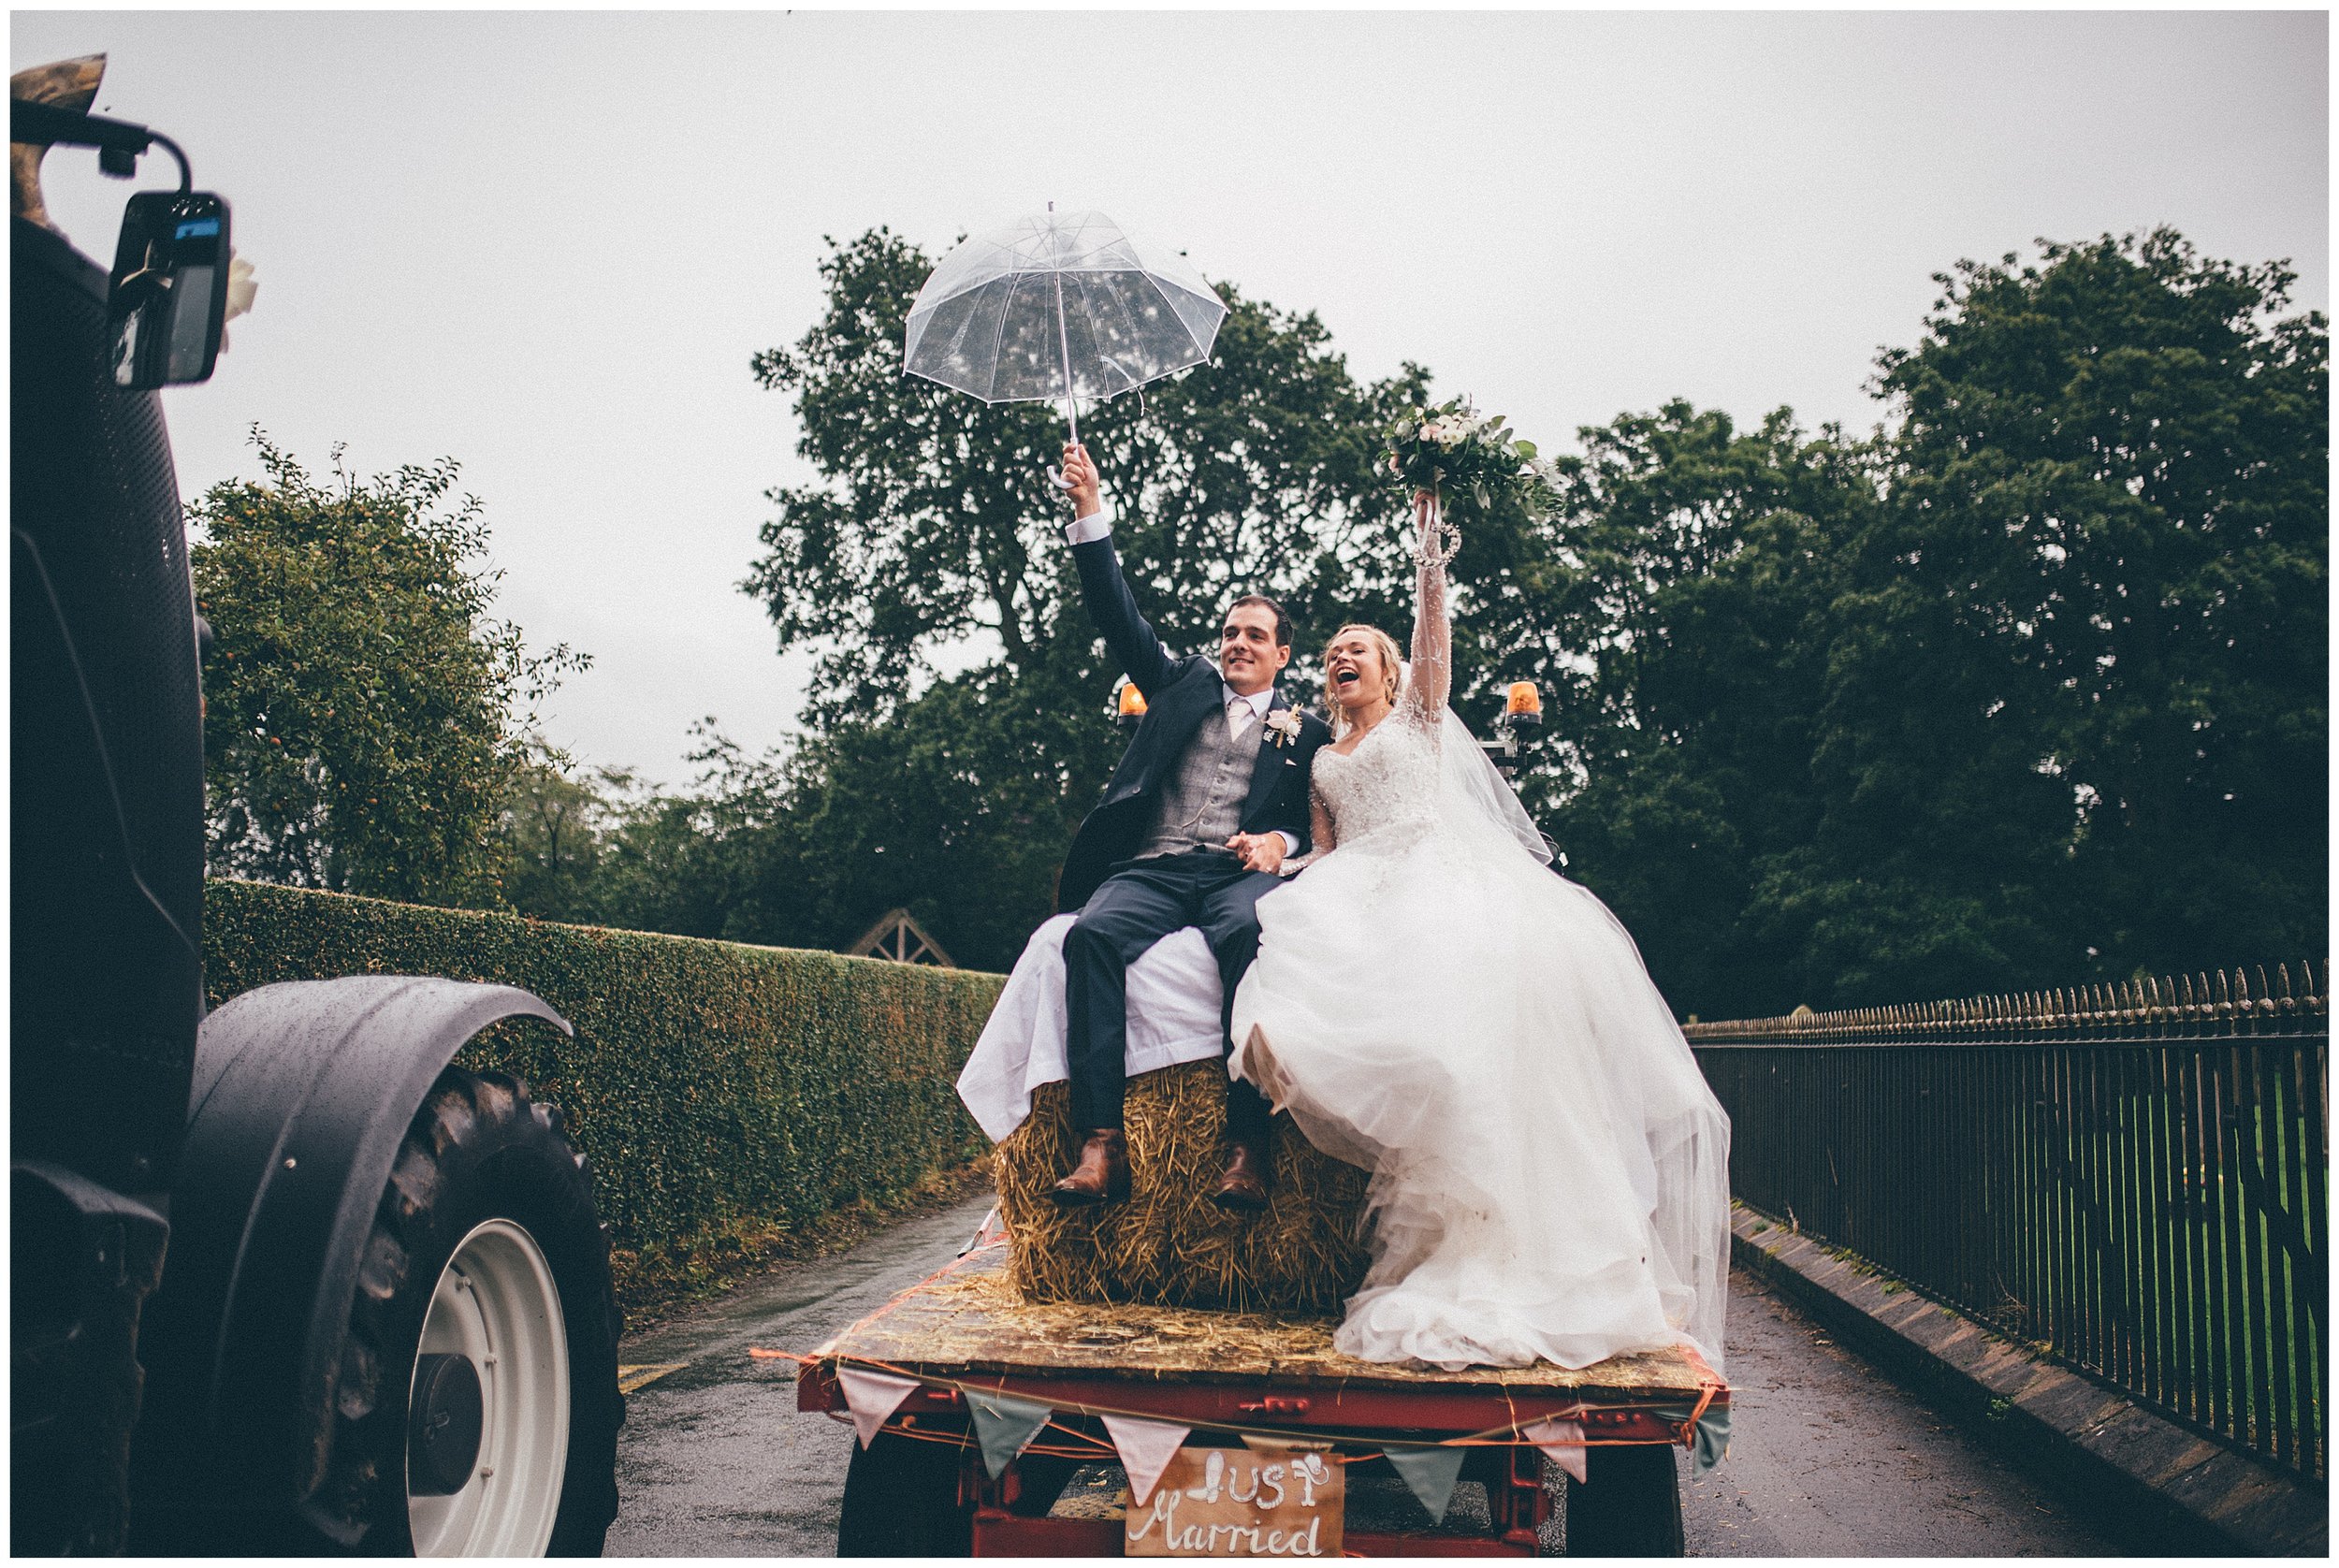 Bride and groom celebrate being Just Married on the back of a tractor